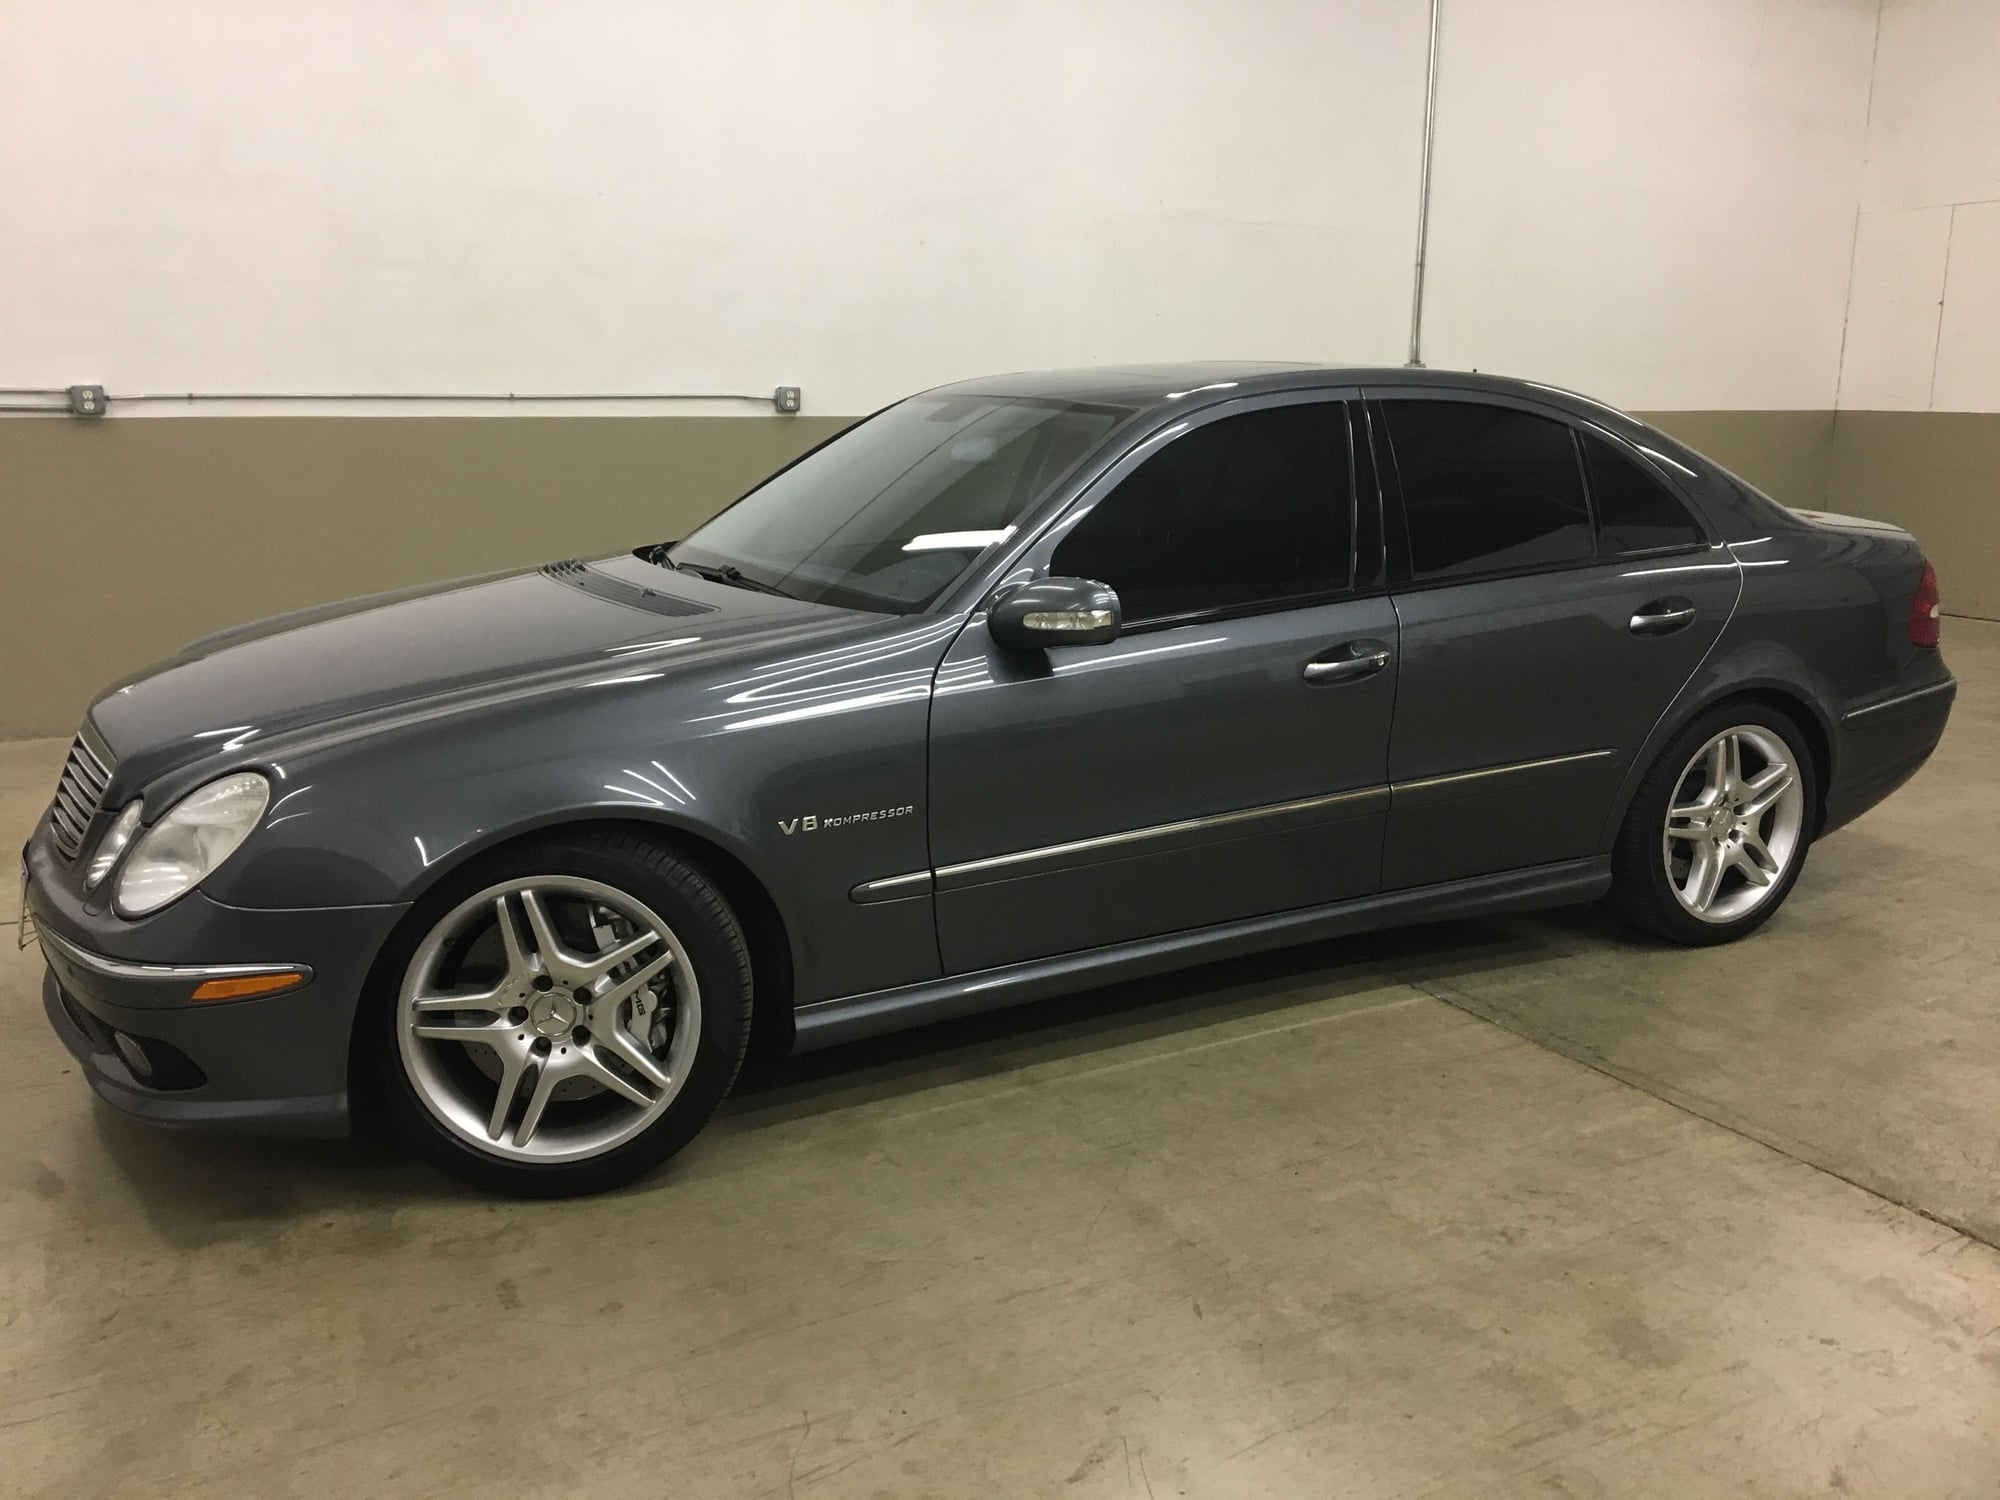 2006 Mercedes-Benz E55 AMG - 2006 E55 AMG in Immaculate Condition and only 74k Miles - Second Owner - Used - VIN WDBUF76J76A911291 - 74,500 Miles - 8 cyl - 2WD - Automatic - Sedan - Gray - Eugene, OR 97402, United States